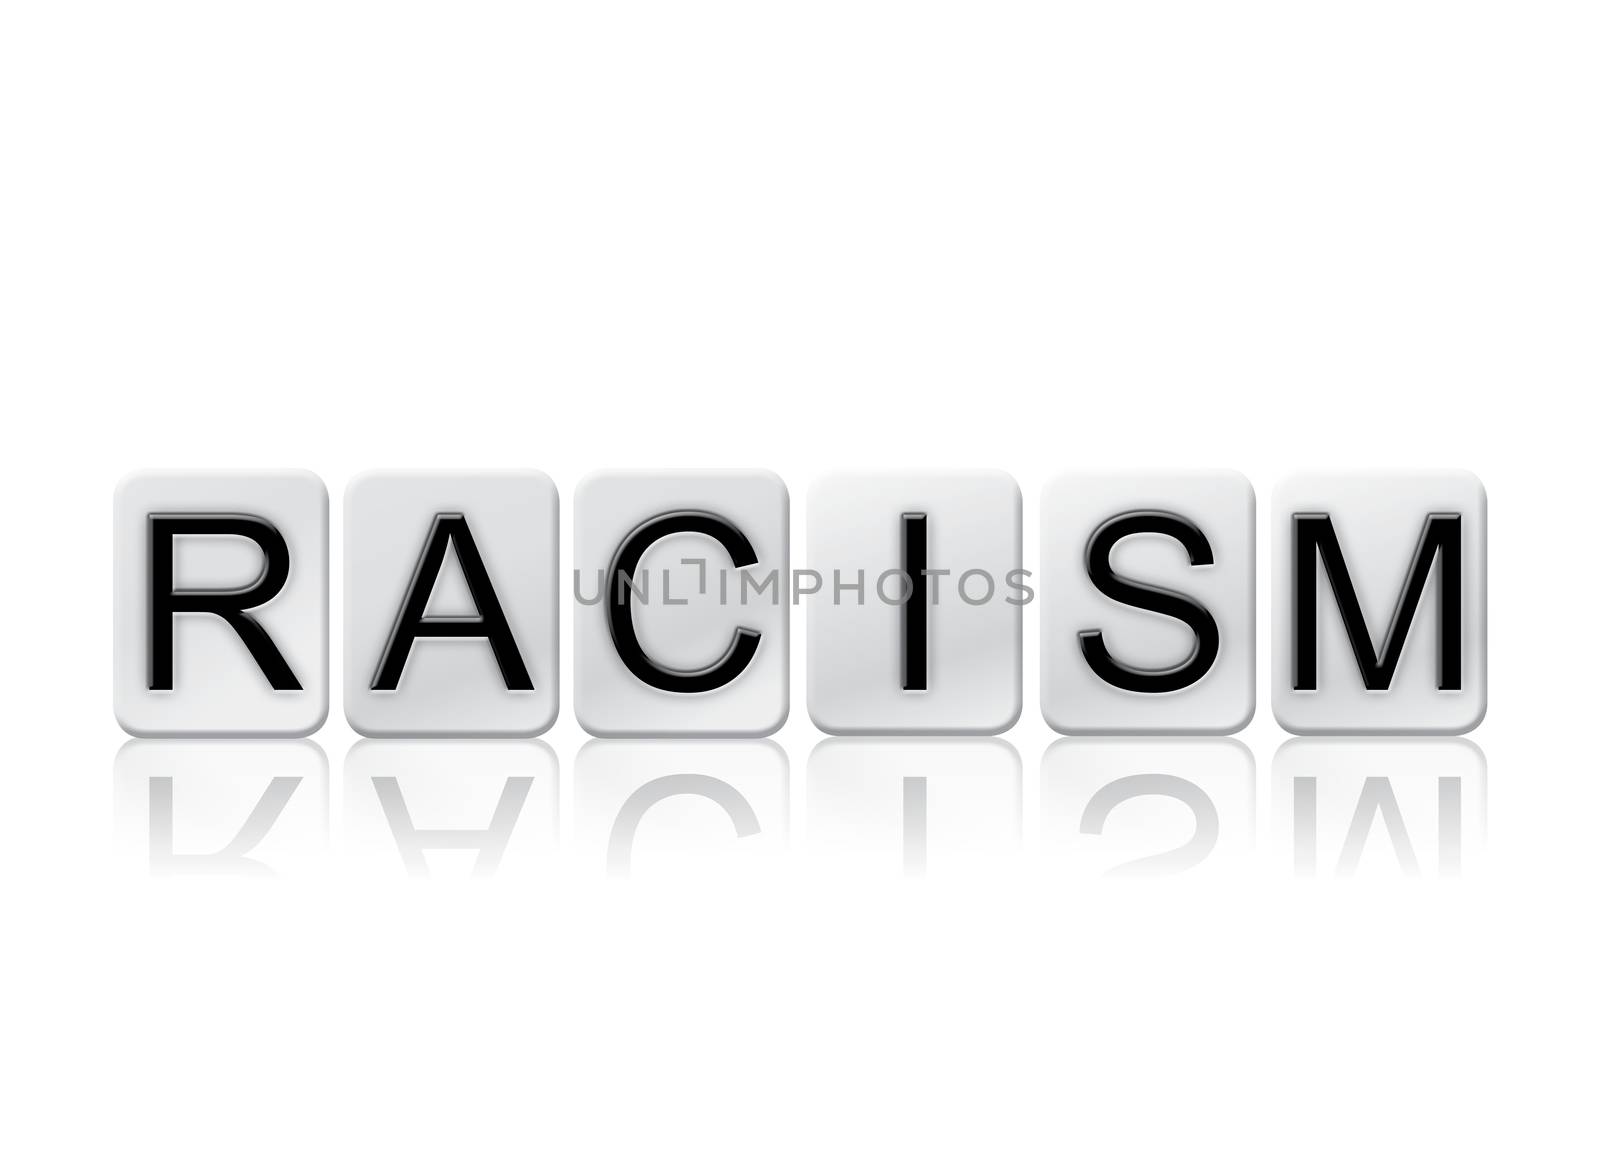 Racism Isolated Tiled Letters Concept and Theme by enterlinedesign